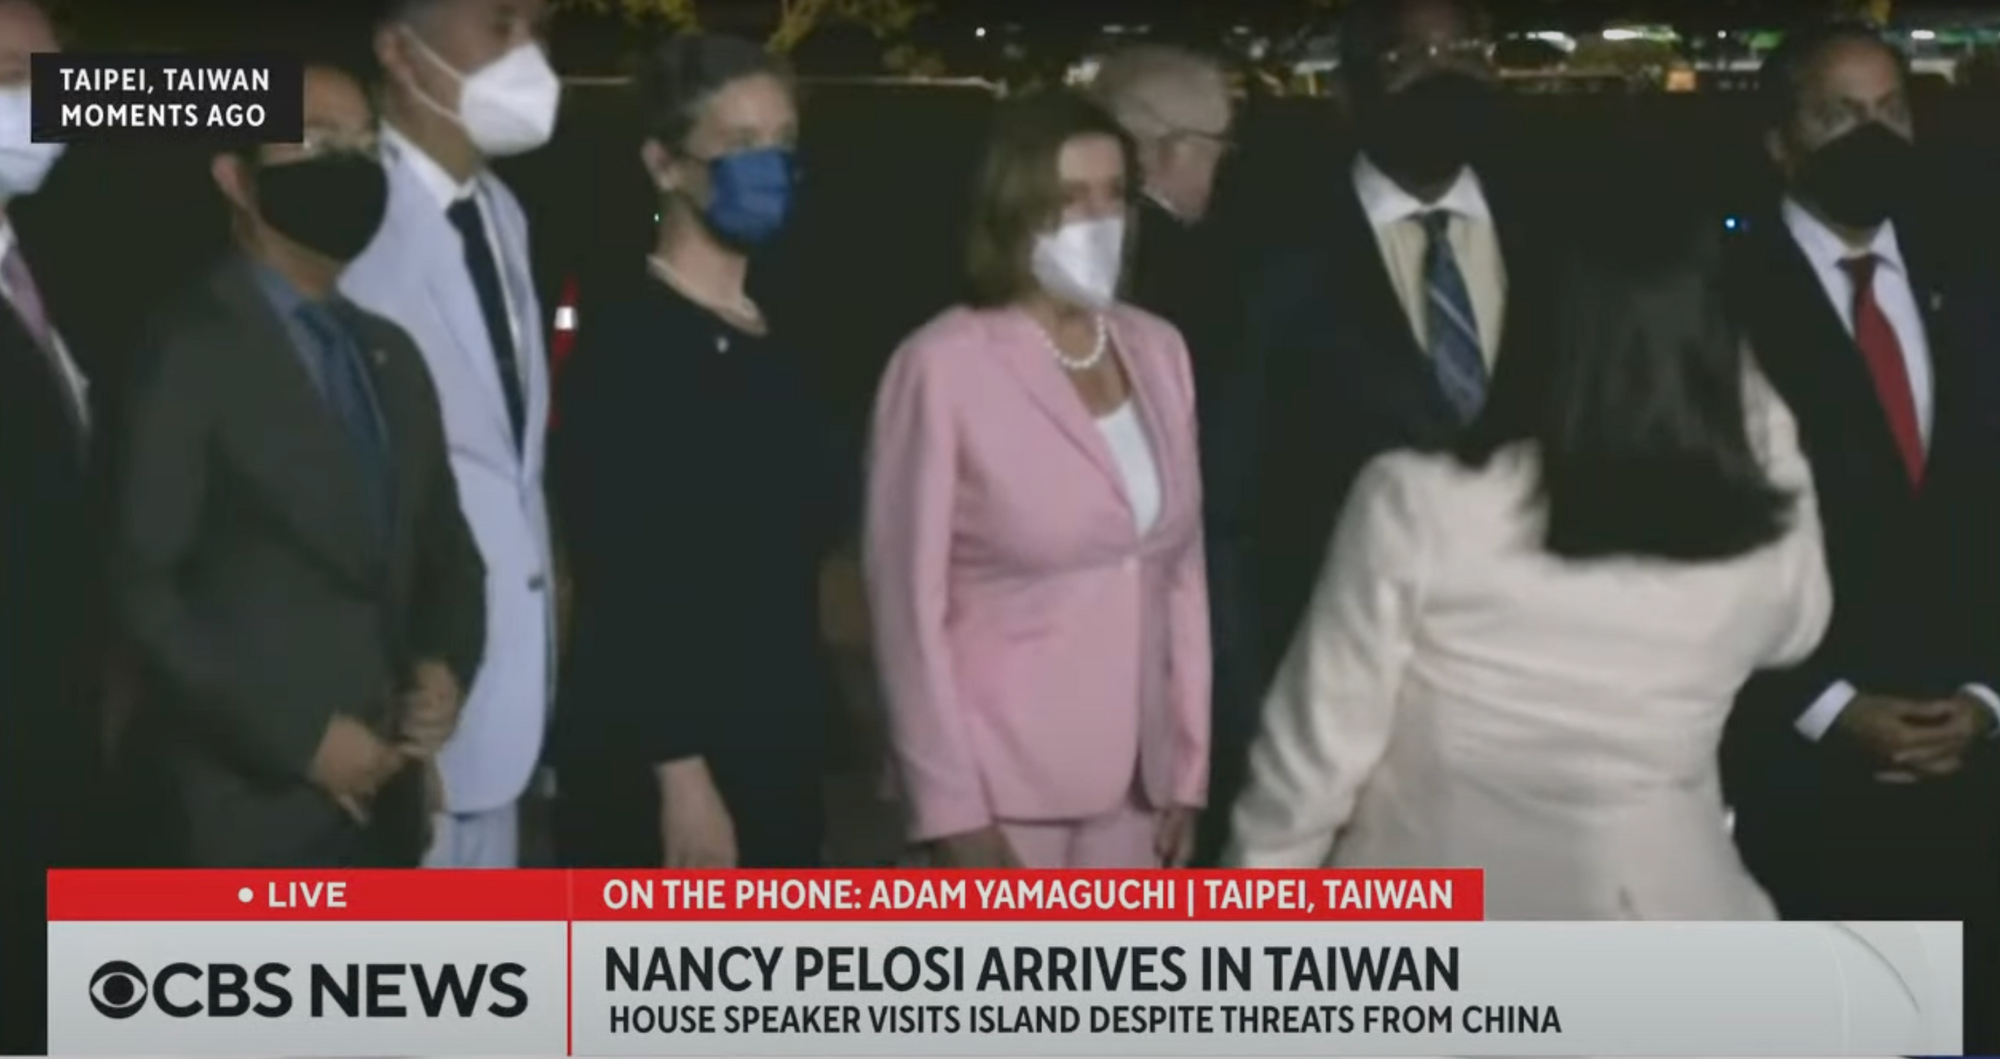 A screenshot of breaking news coverage from CBS after Pelosi landed in Ukraine.